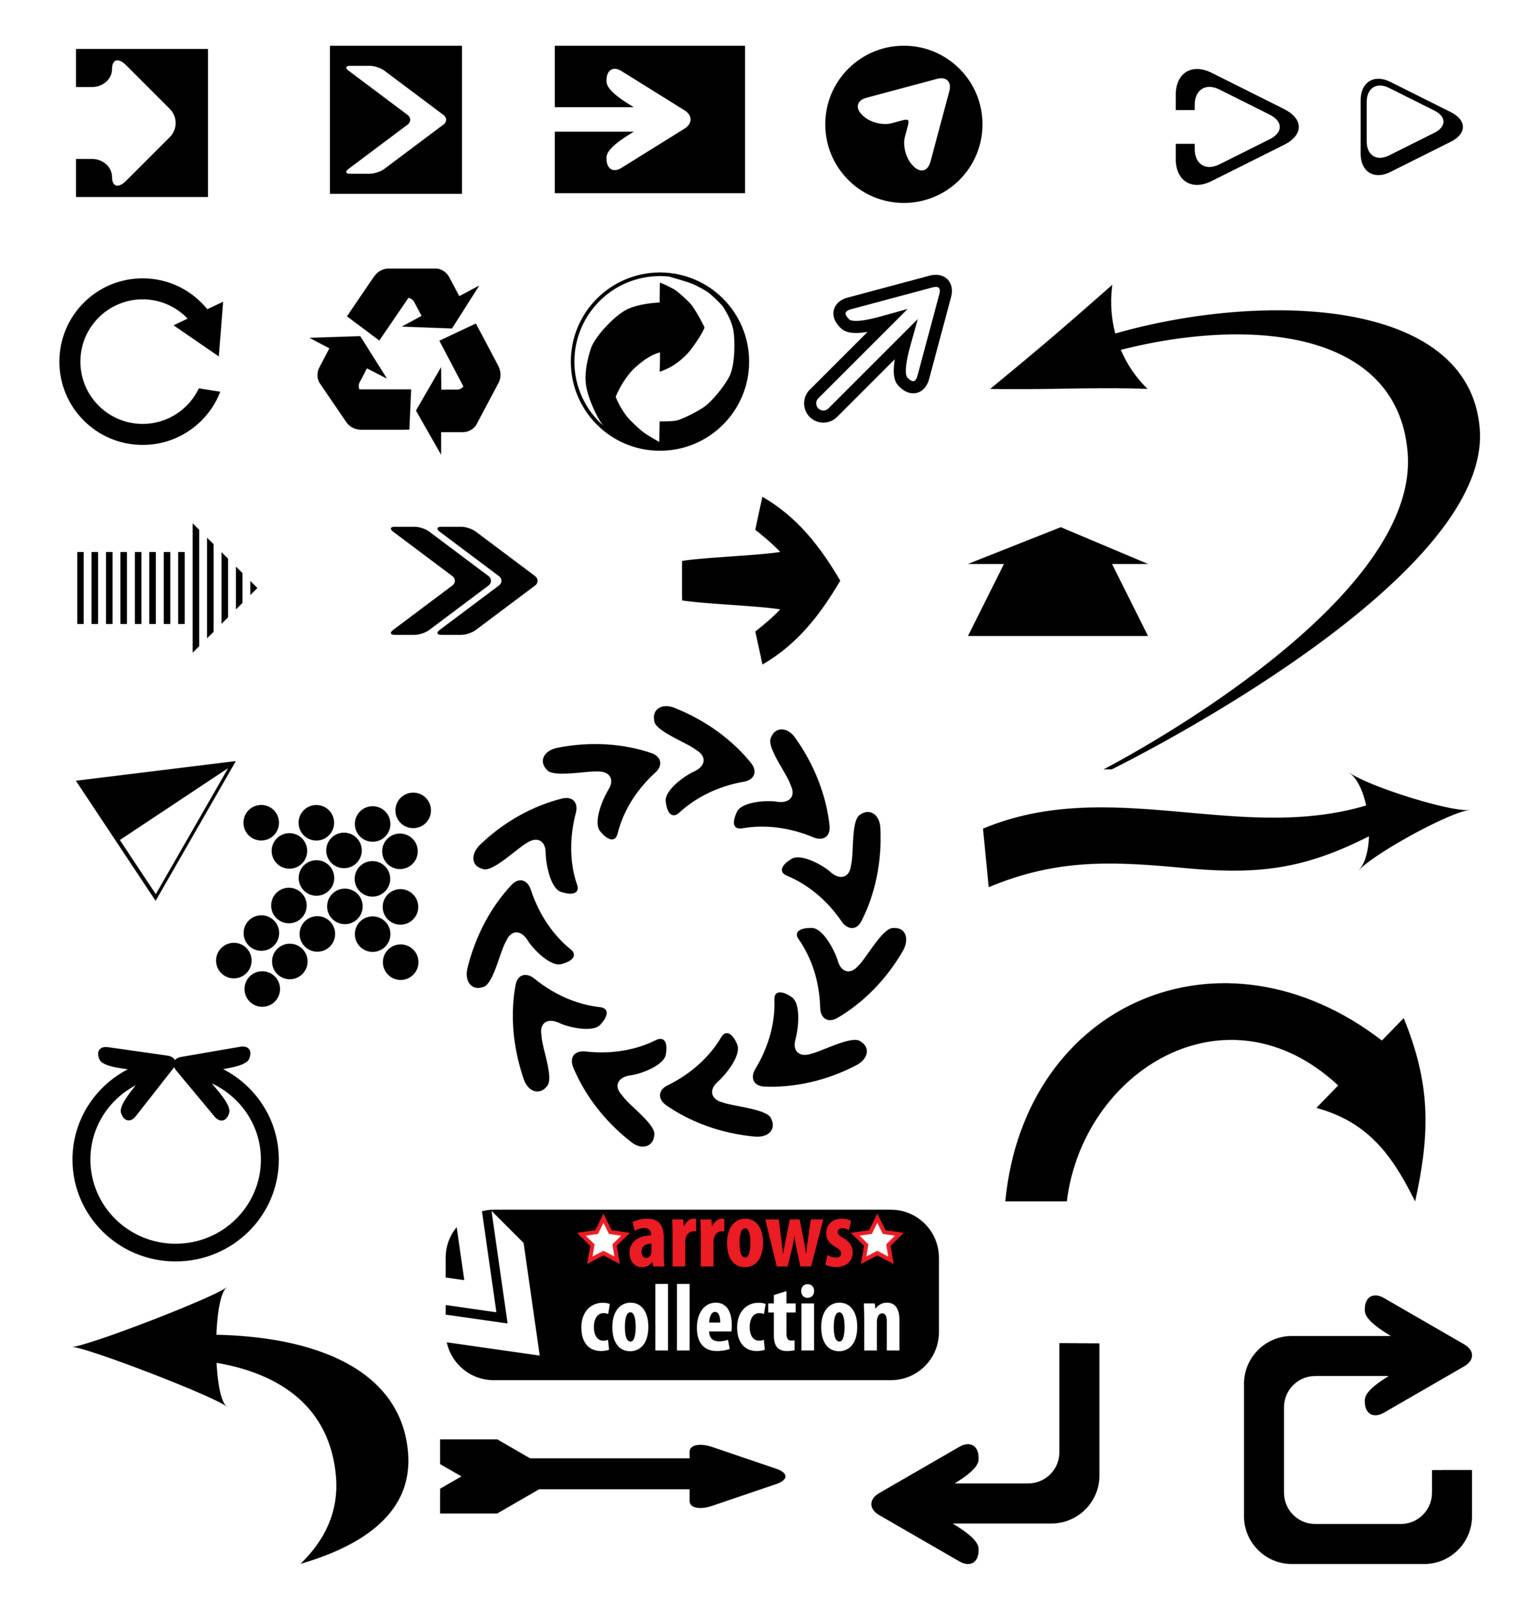 many different arrows a great design template